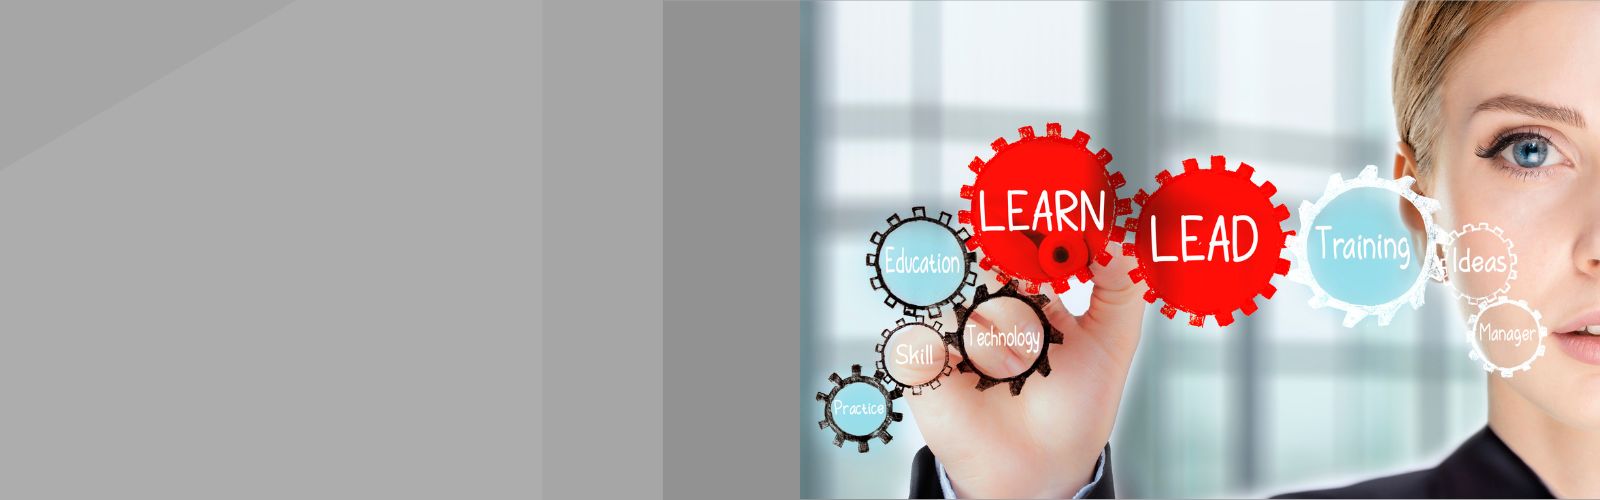 eLearning Services banner